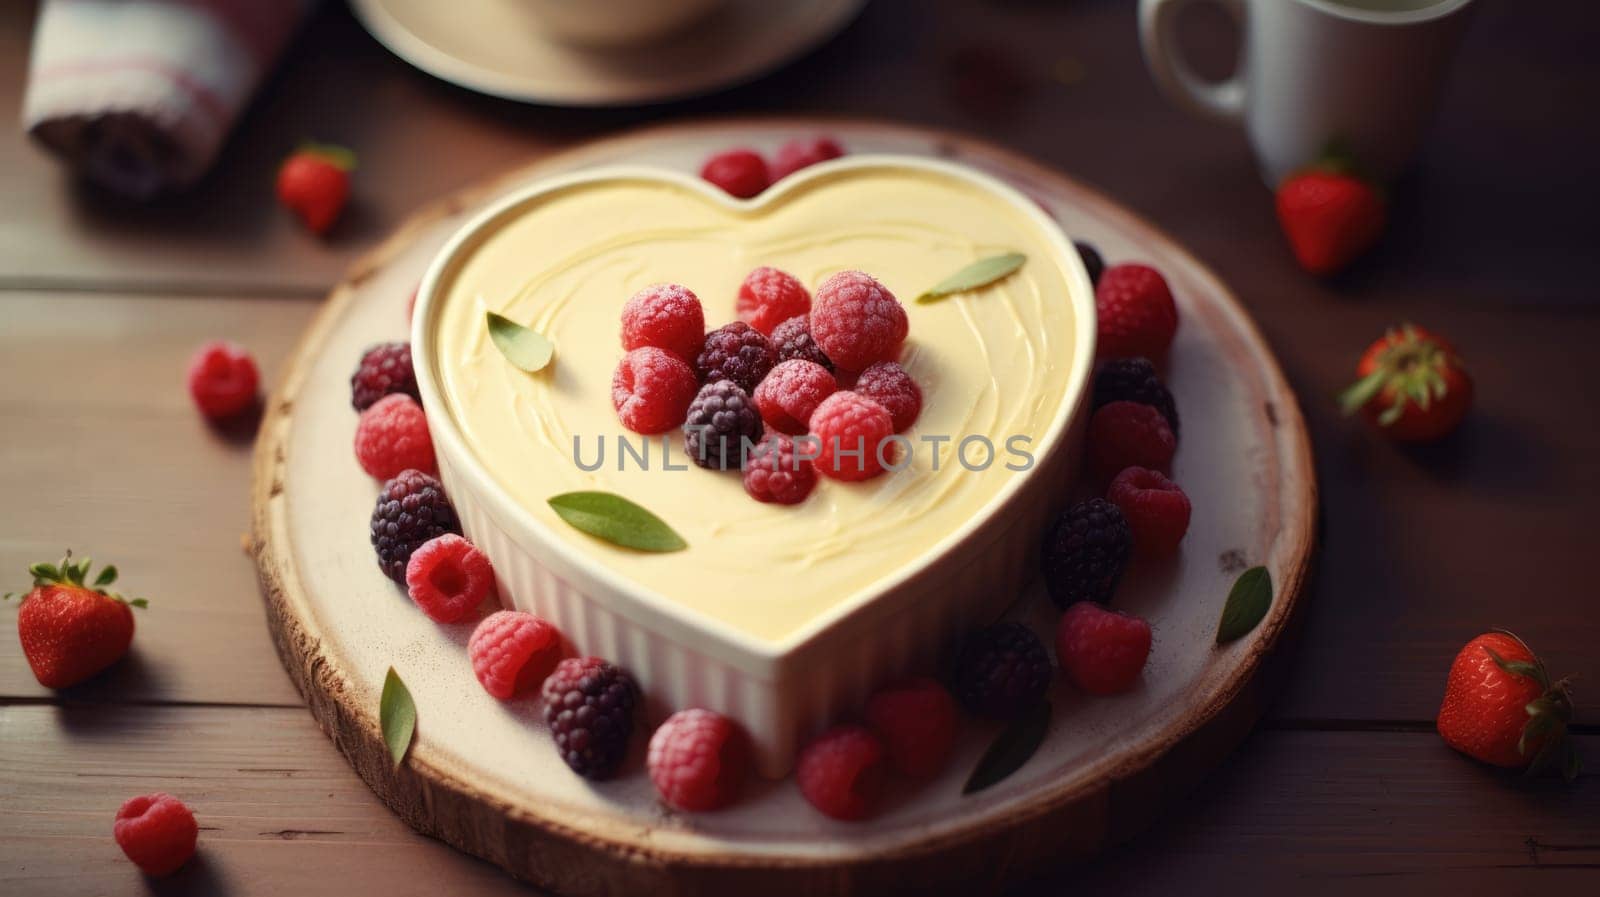 Valentines day heart shaped cheese cake with strawberries on wooden plate. Valentines day dessert. Top view with copy space. by JuliaDorian